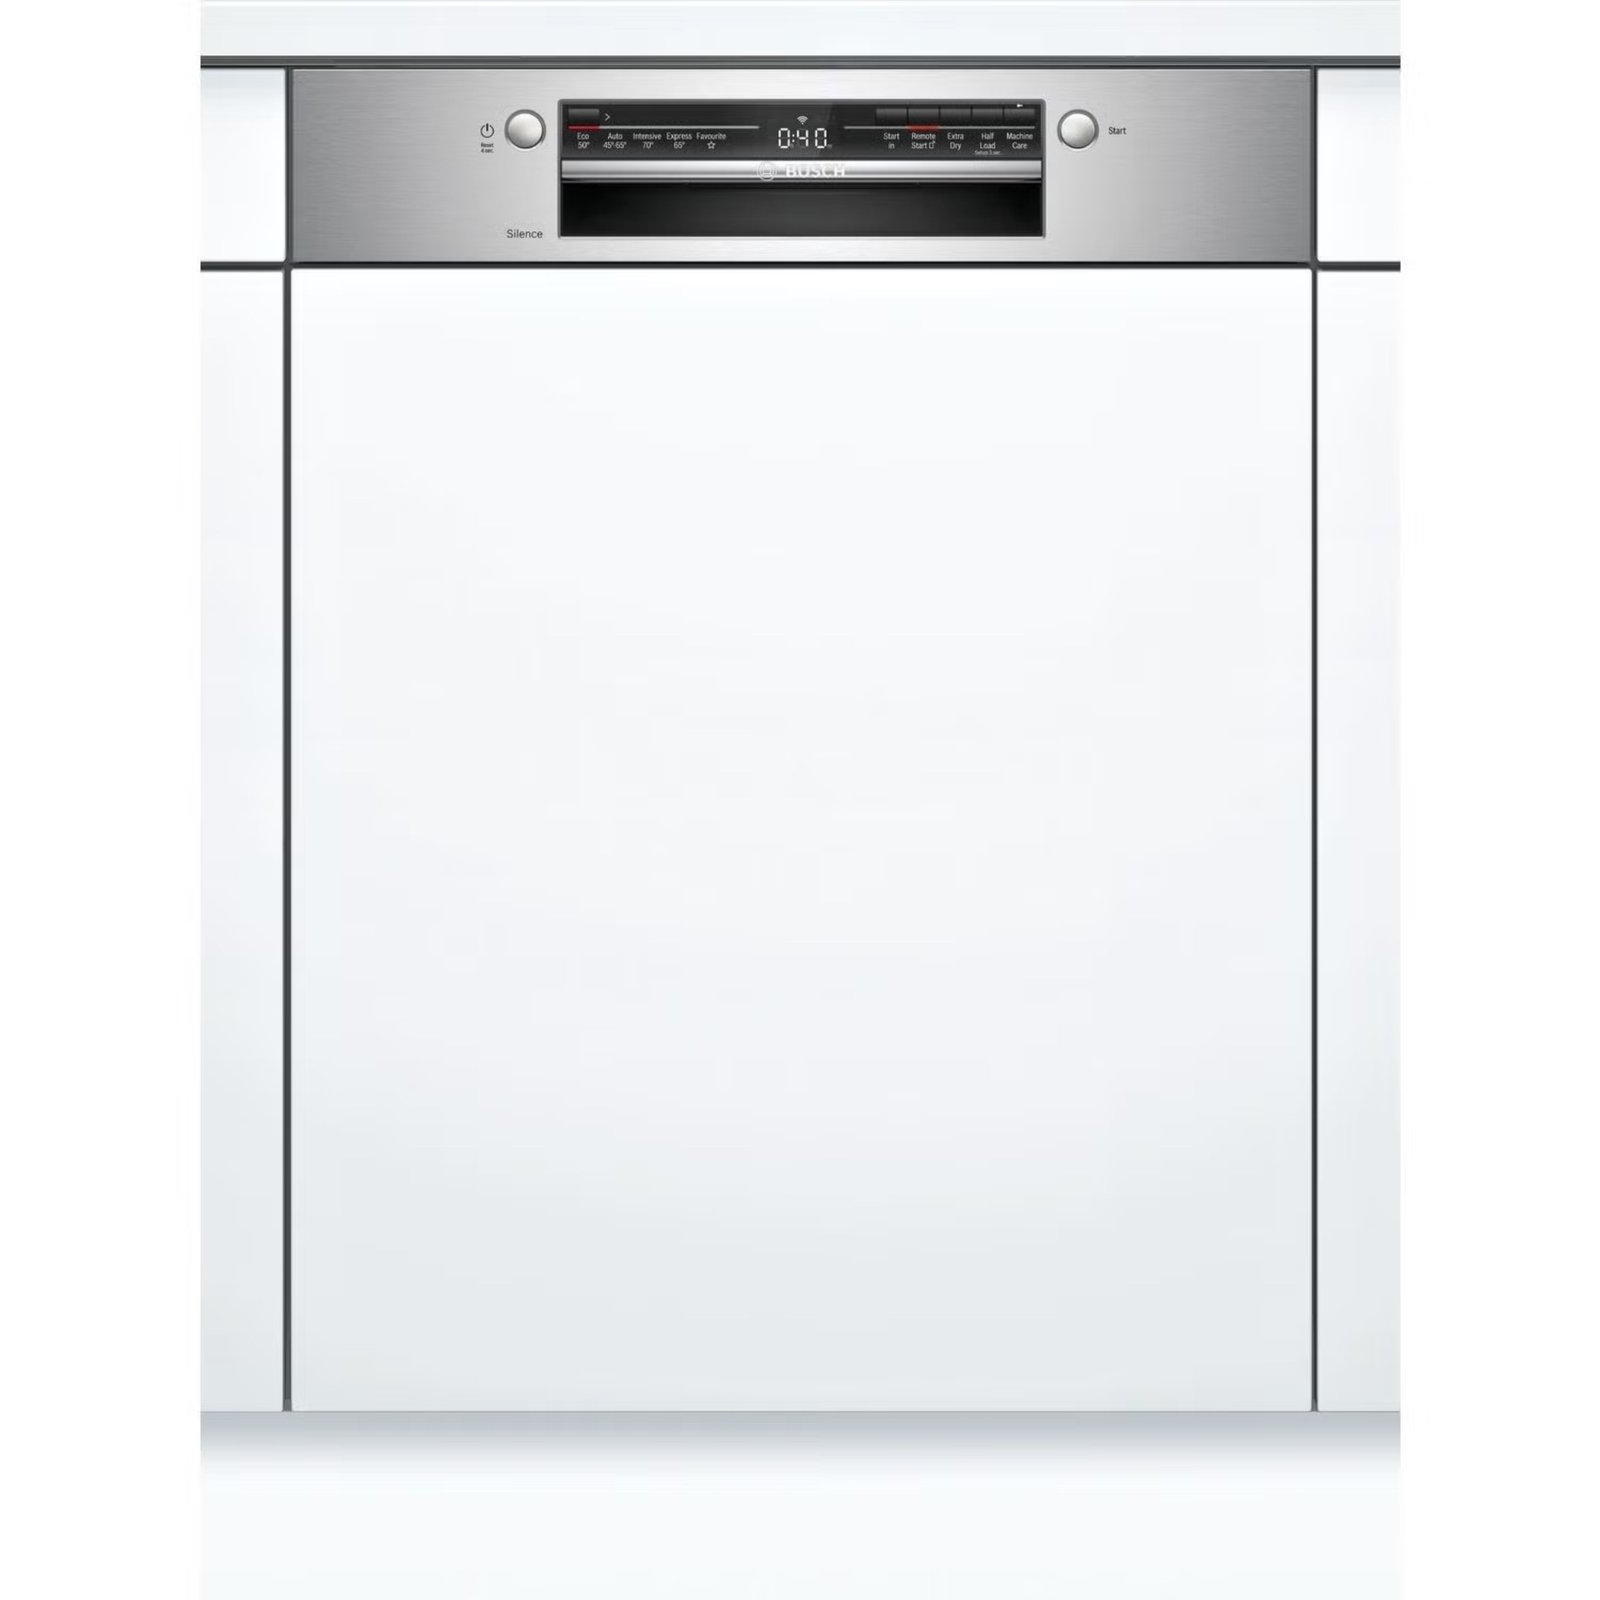 white dishwasher with silver display panel